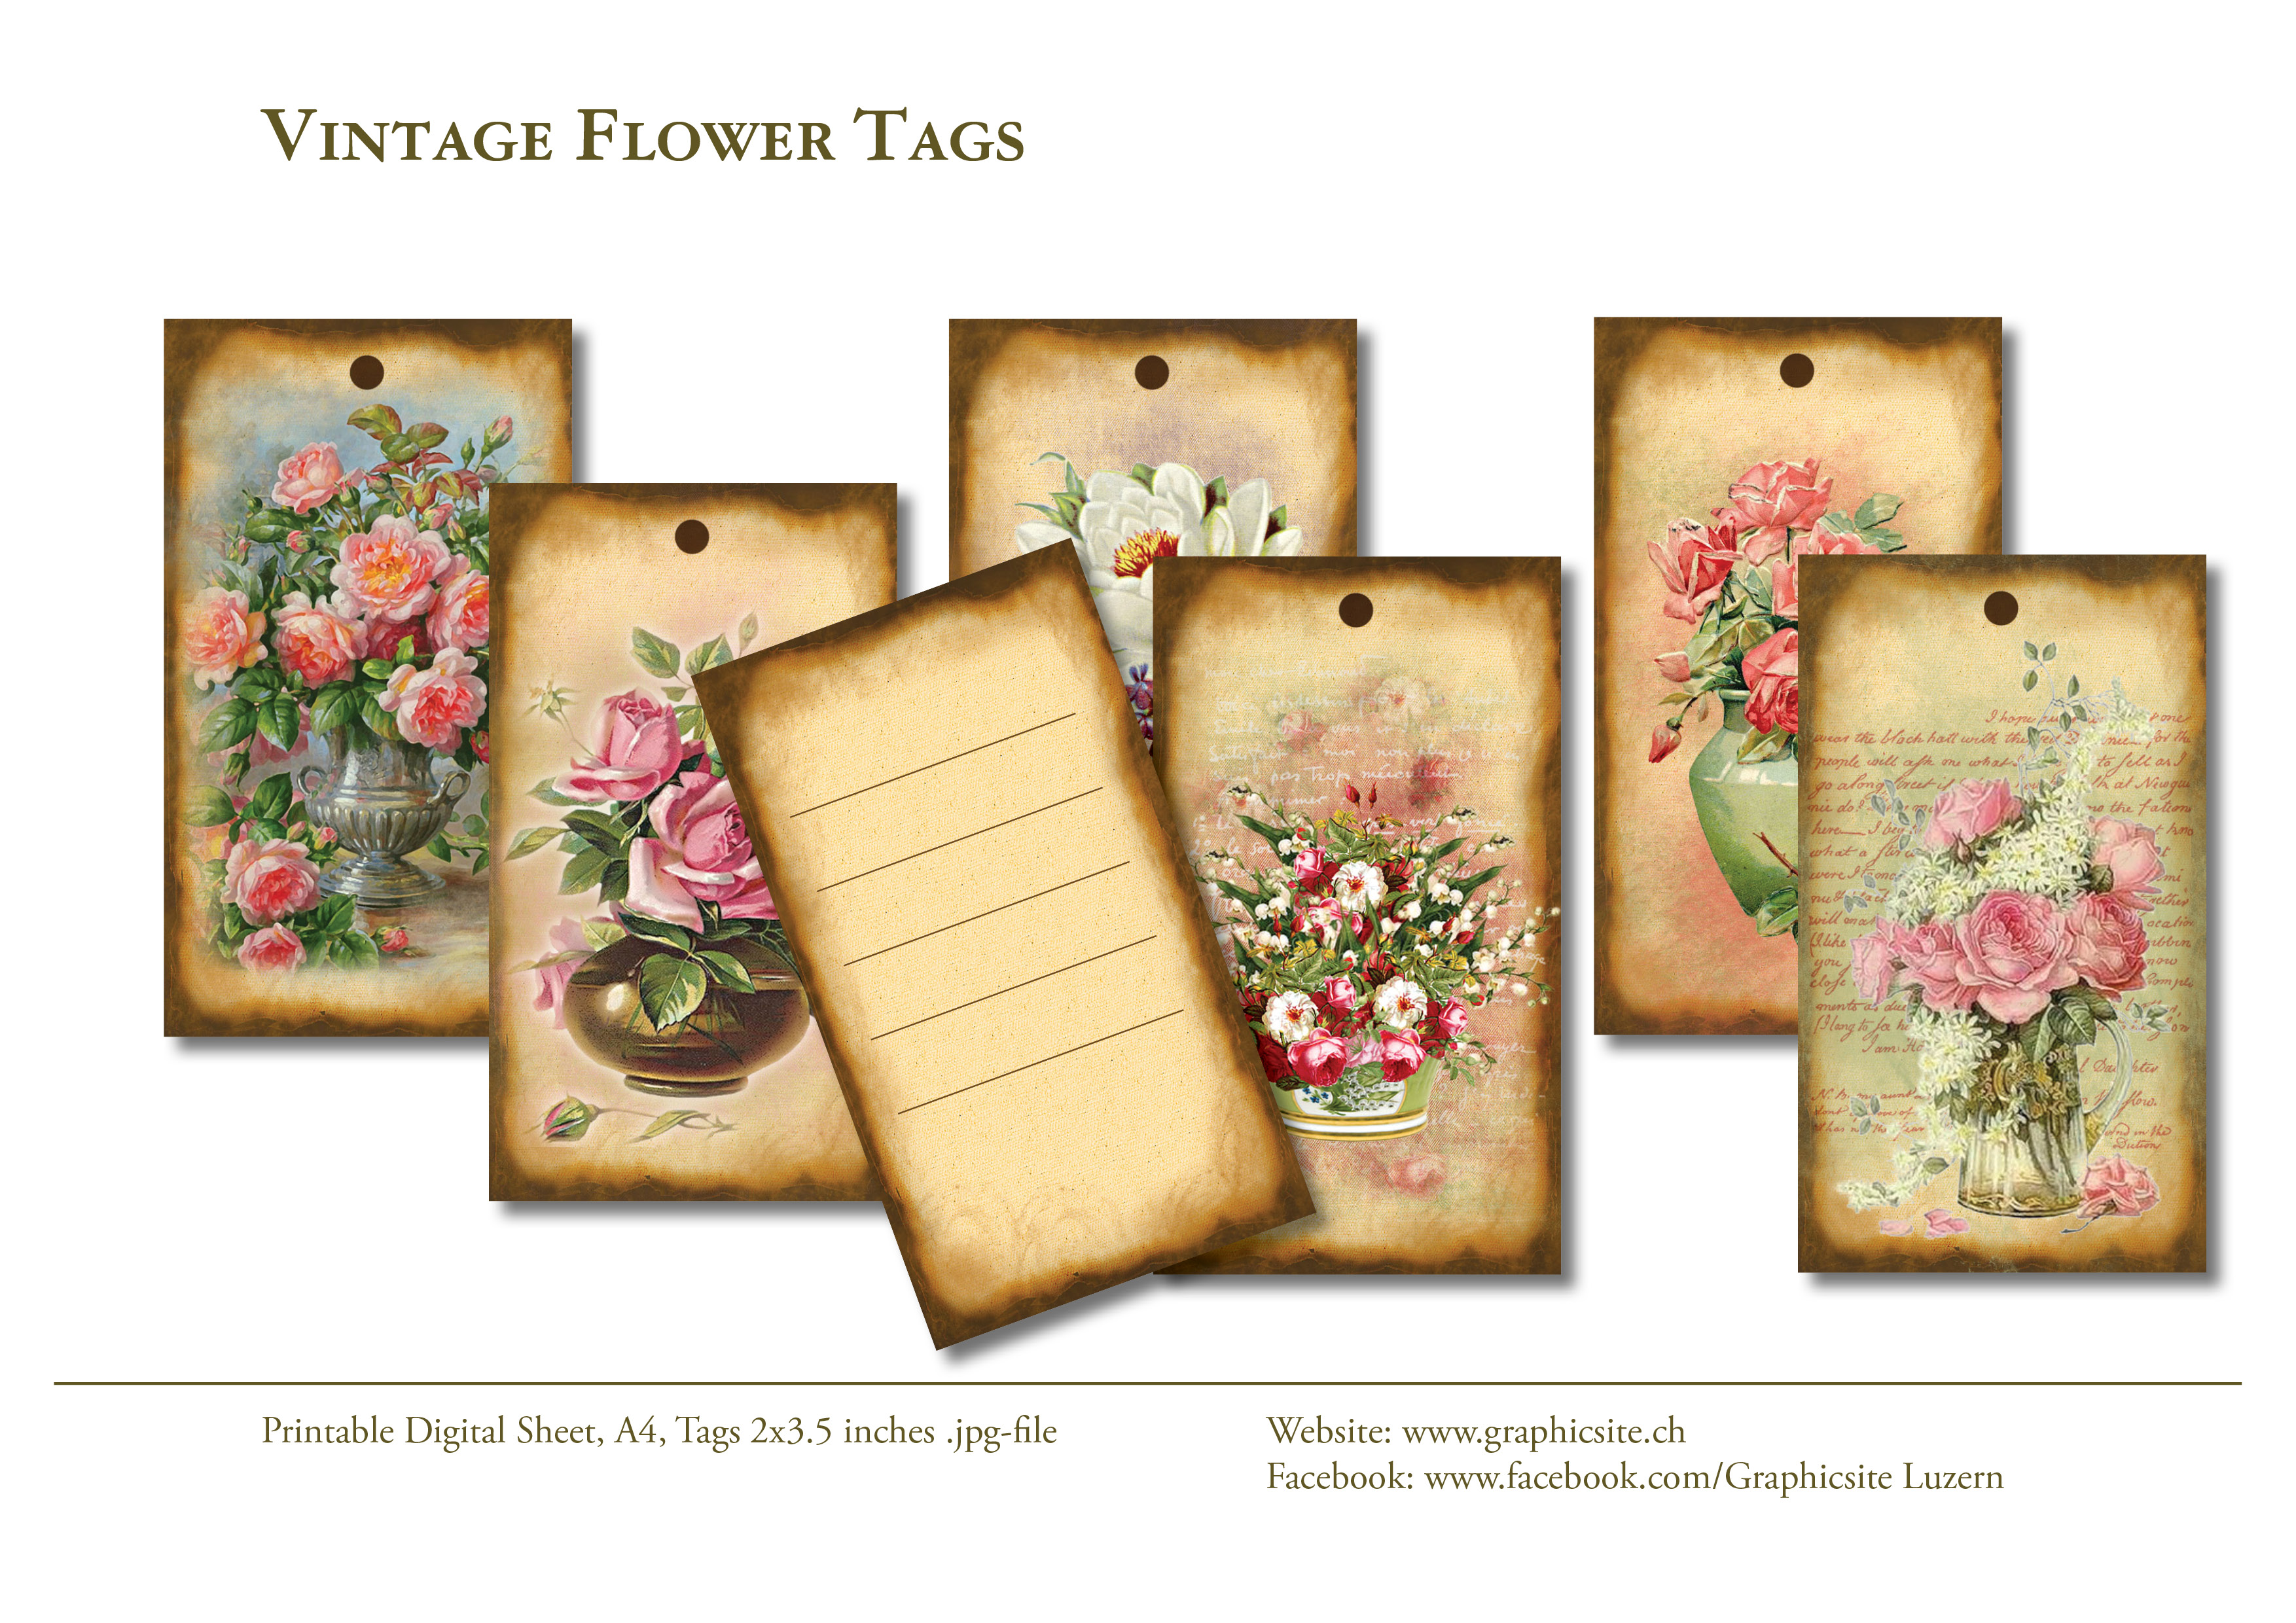 Printable Digital Sheets - Tags - VintageFlowerTags - #tags, #gifttags, #scrapbooking, #papercrafts